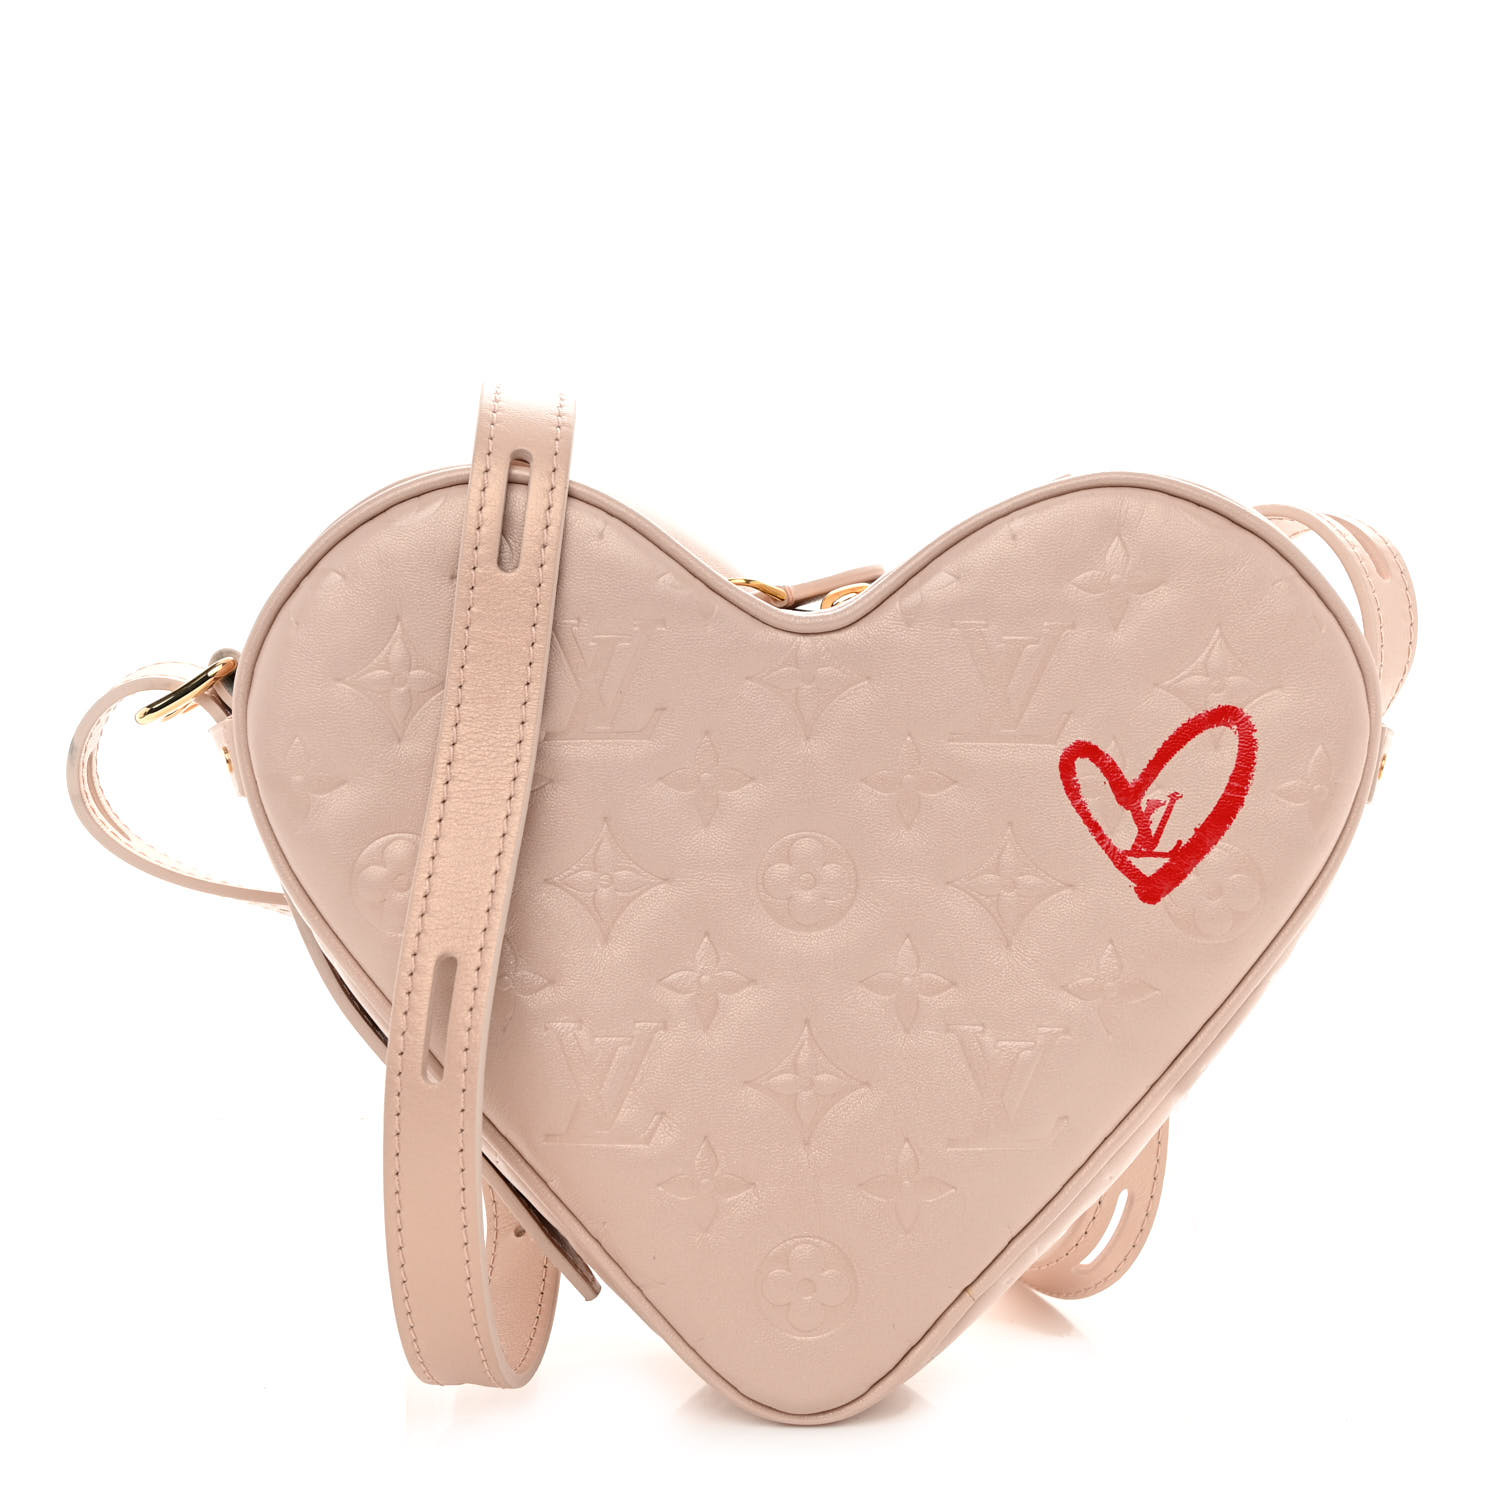 image of LOUIS VUITTON Lambskin Embossed Monogram Fall In Love Sac Coeur in the color Light Pink by FASHIONPHILE